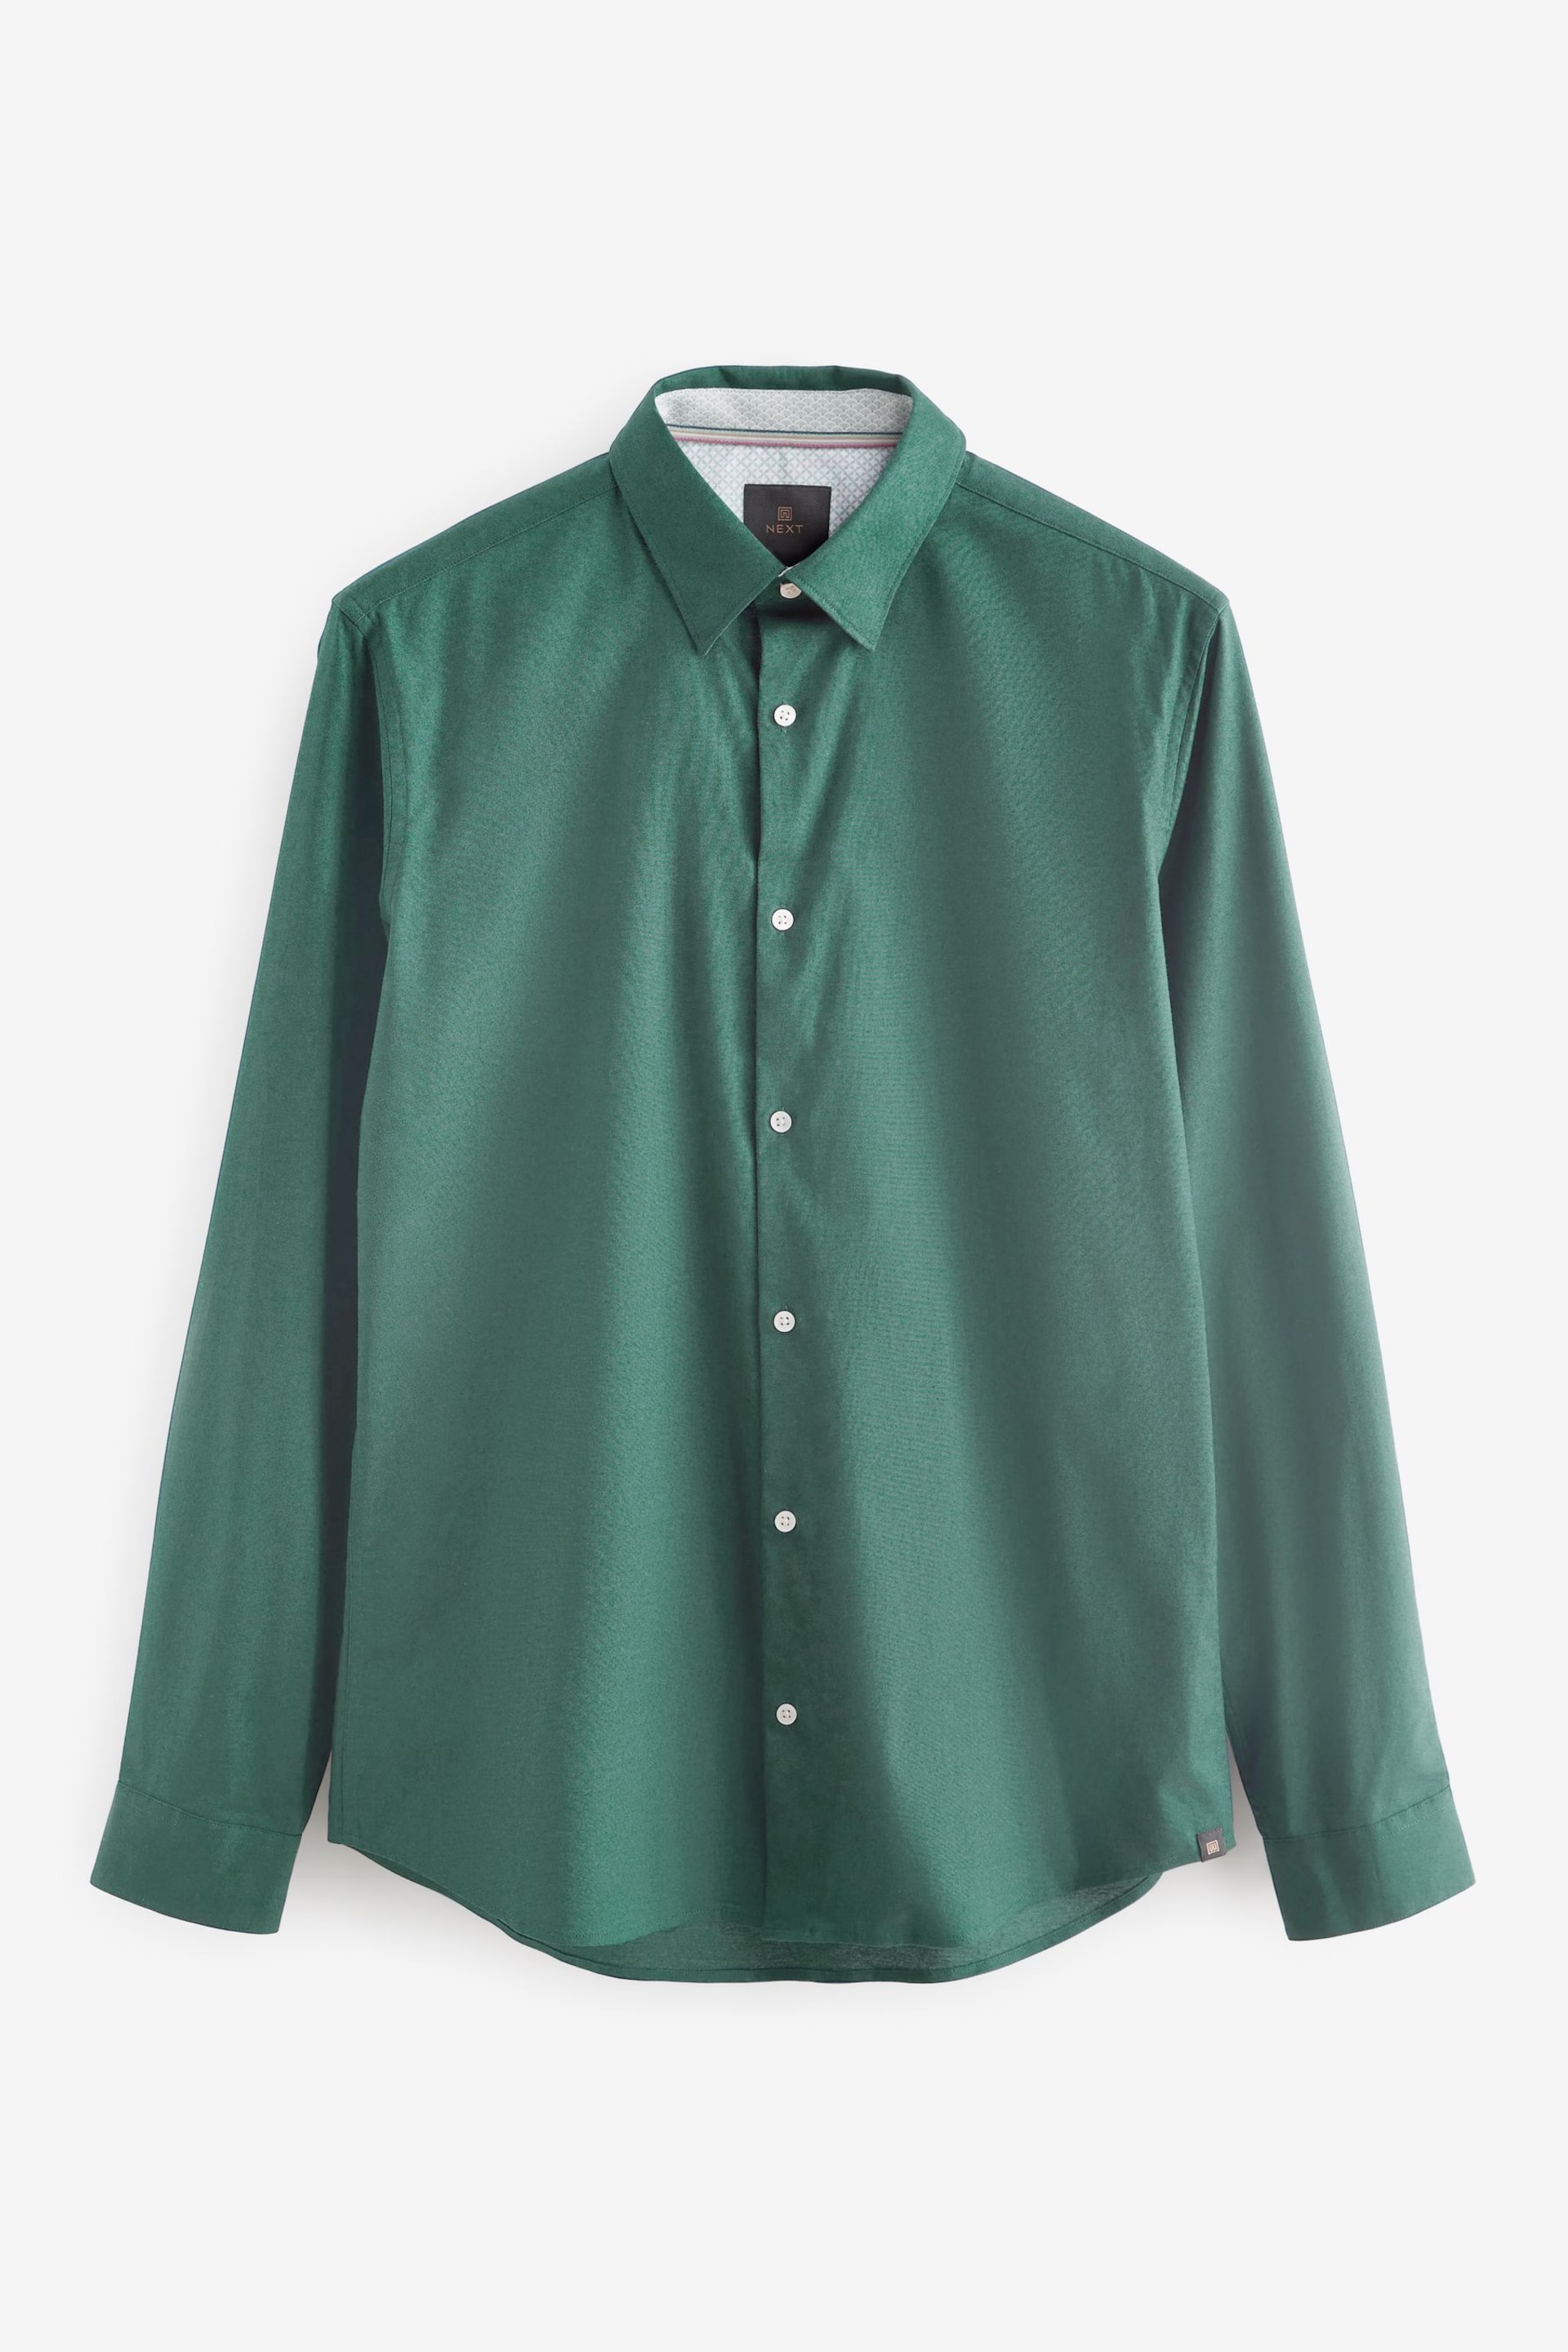 Blue Stretch Oxford Long Sleeve Shirt - Image 7 of 9